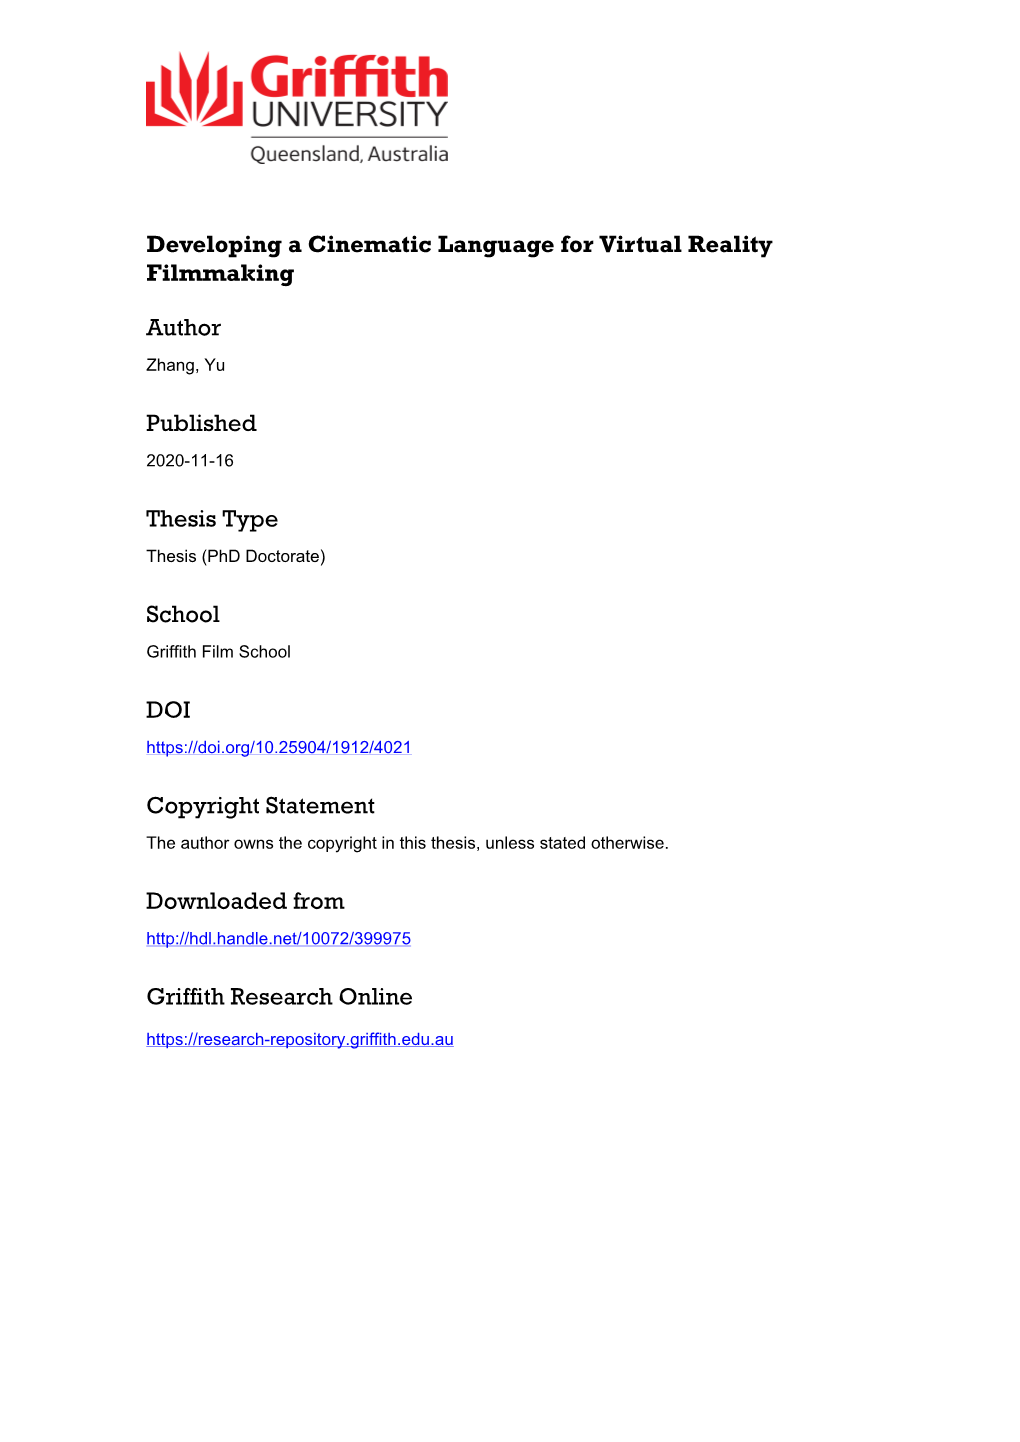 Developing a Cinematic Language for Virtual Reality Filmmaking